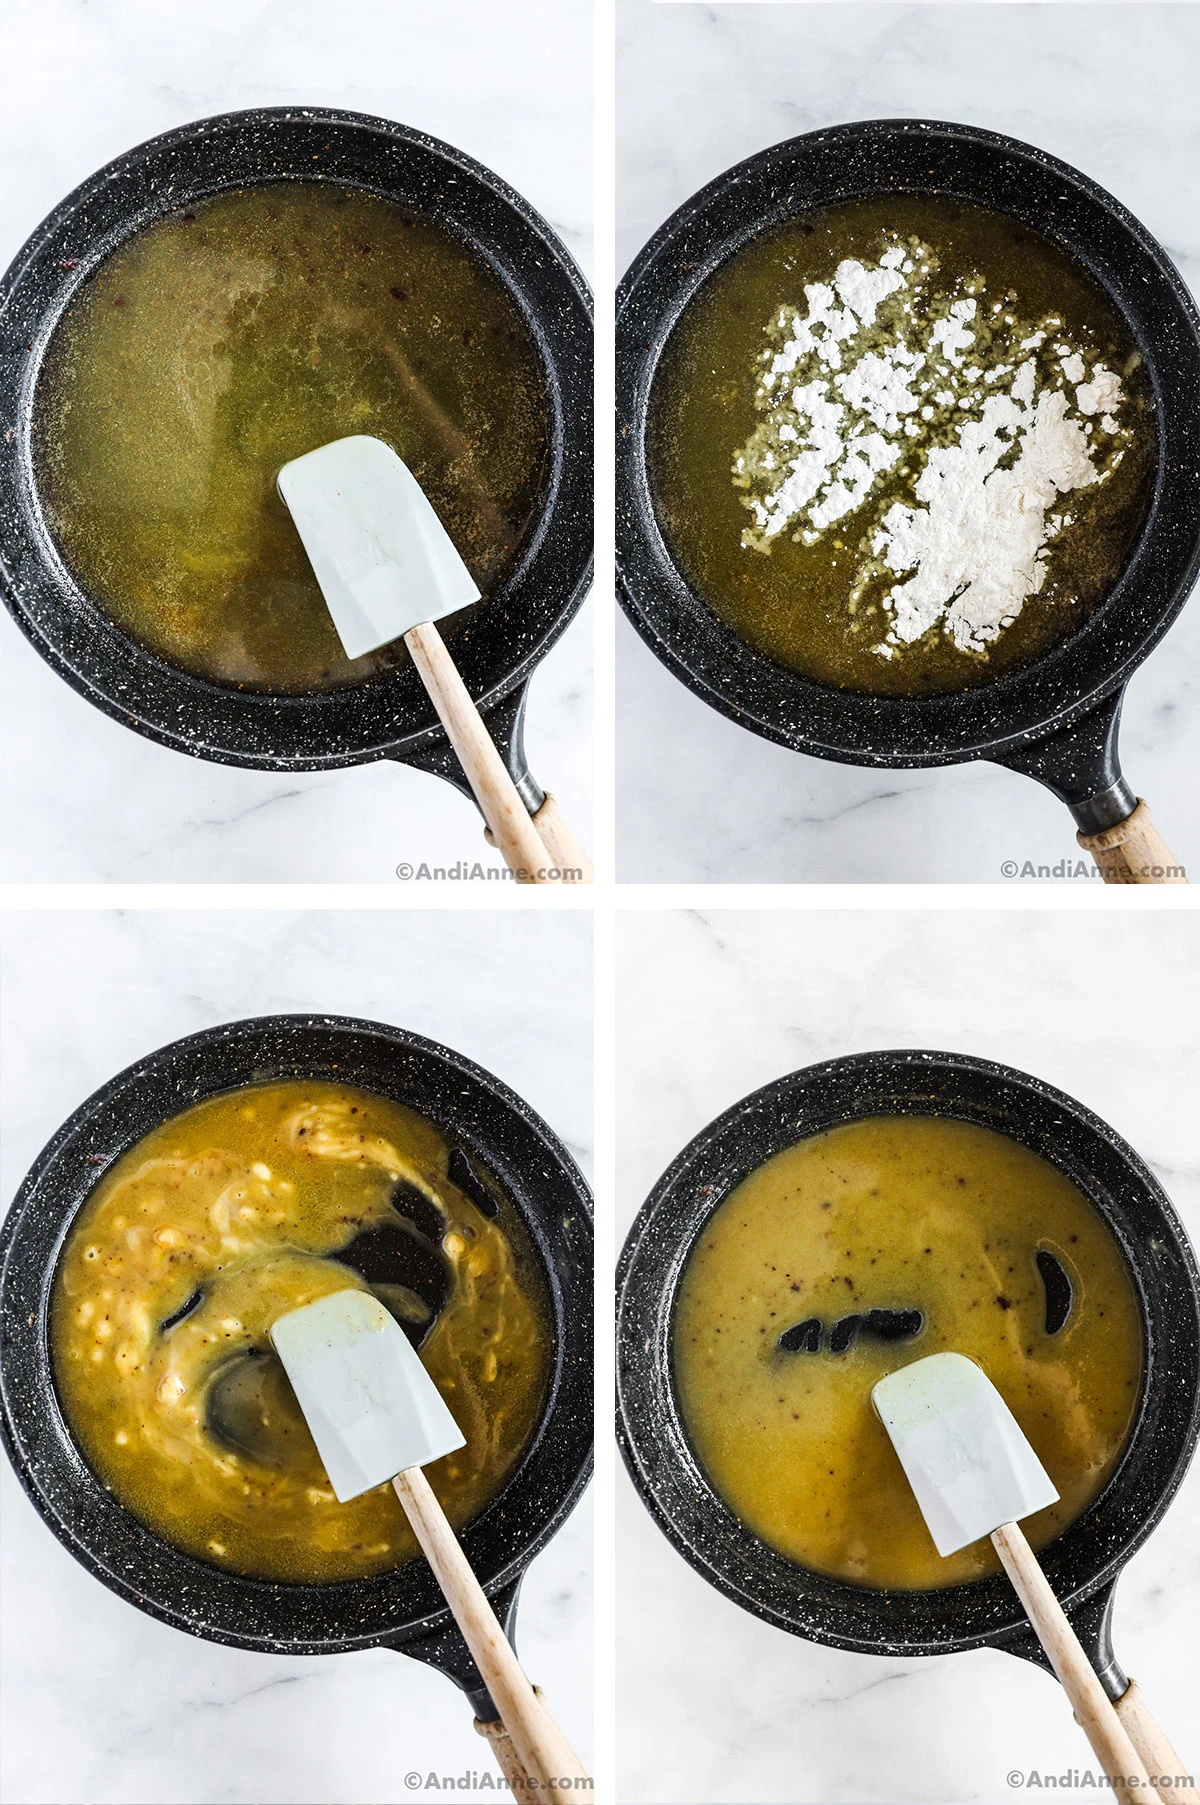 Four images of a frying pan with liquid and flour and thickened sauce in various stages of cooking.